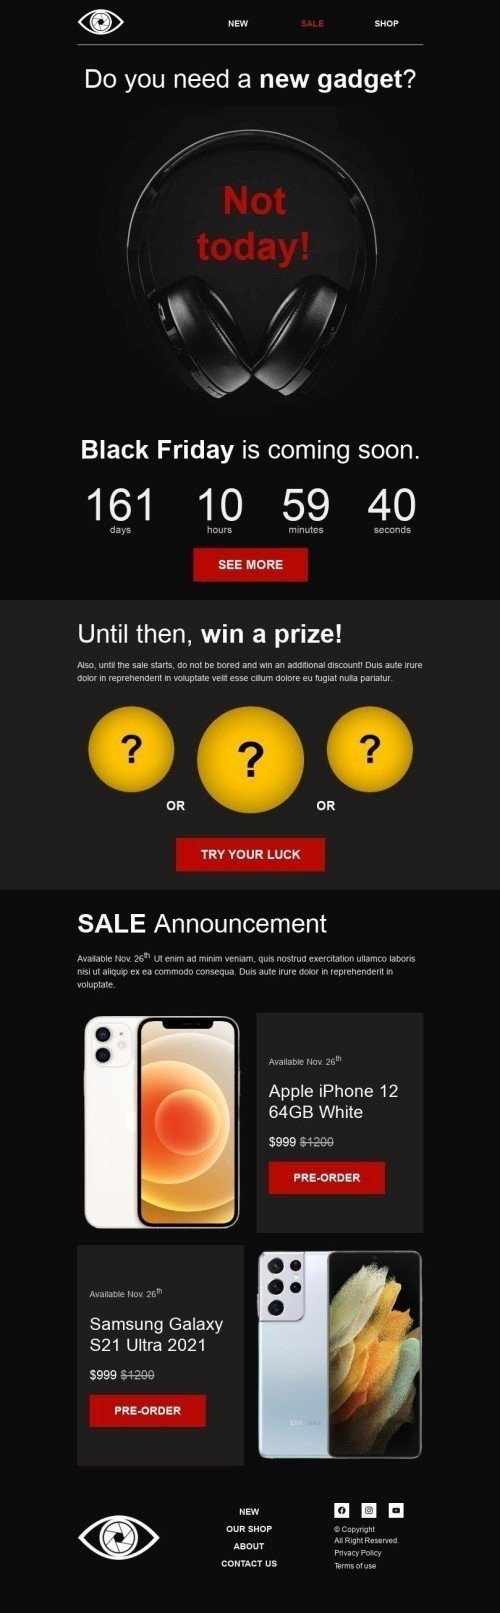 Black Friday Email Template «Win a prize» for Gadgets industry desktop view